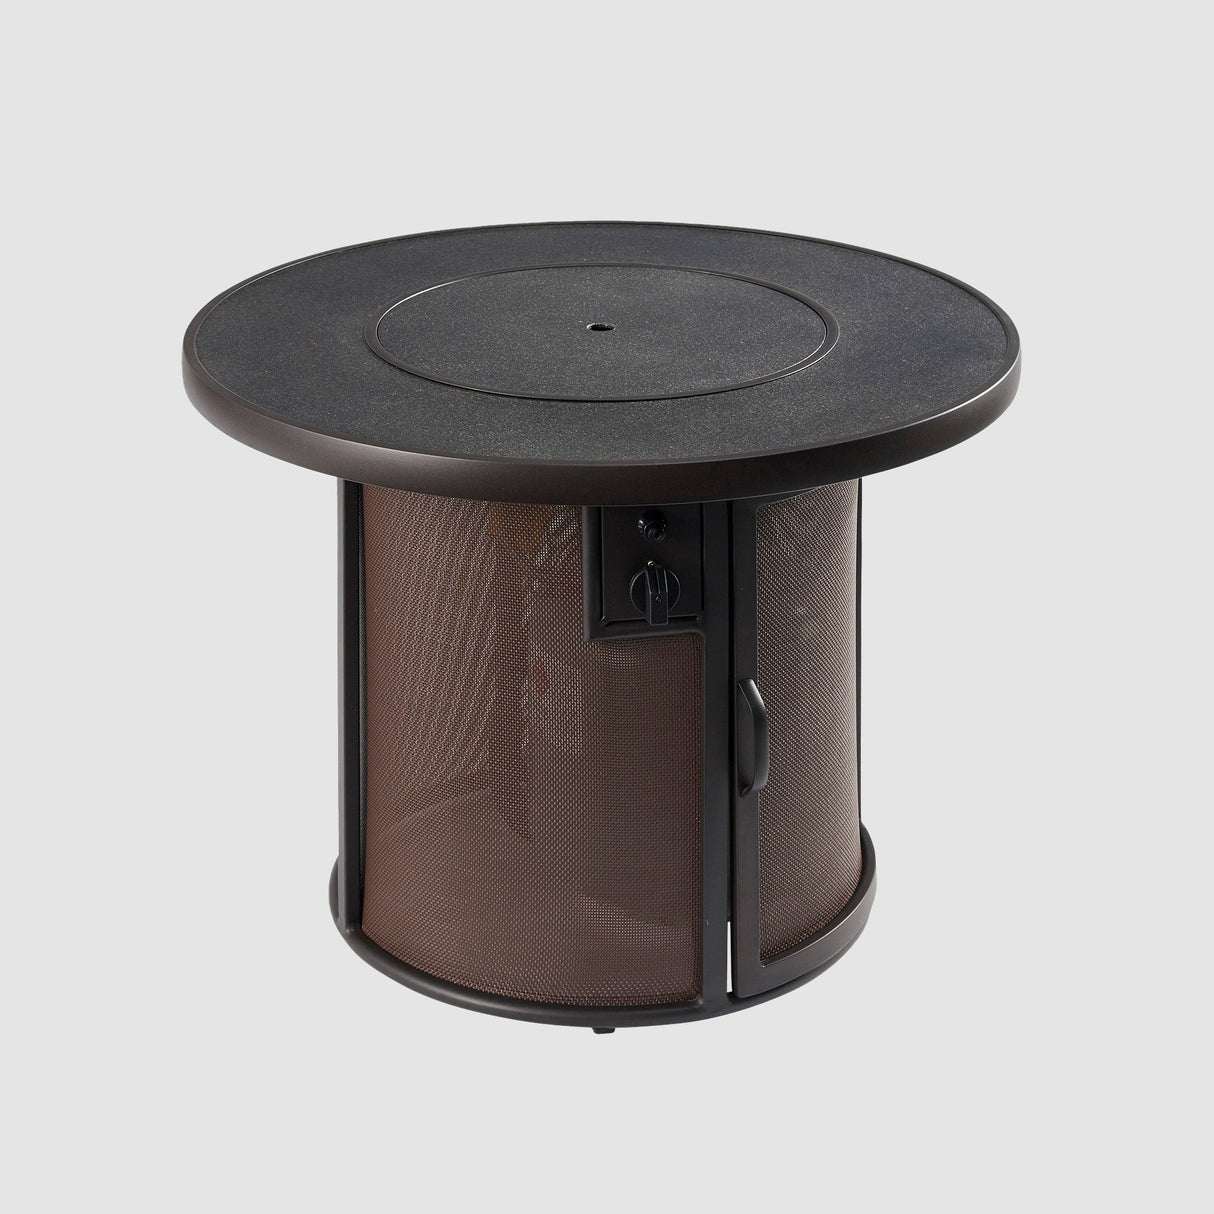 A cover placed on the Brown Stonefire Round Gas Fire Pit Table